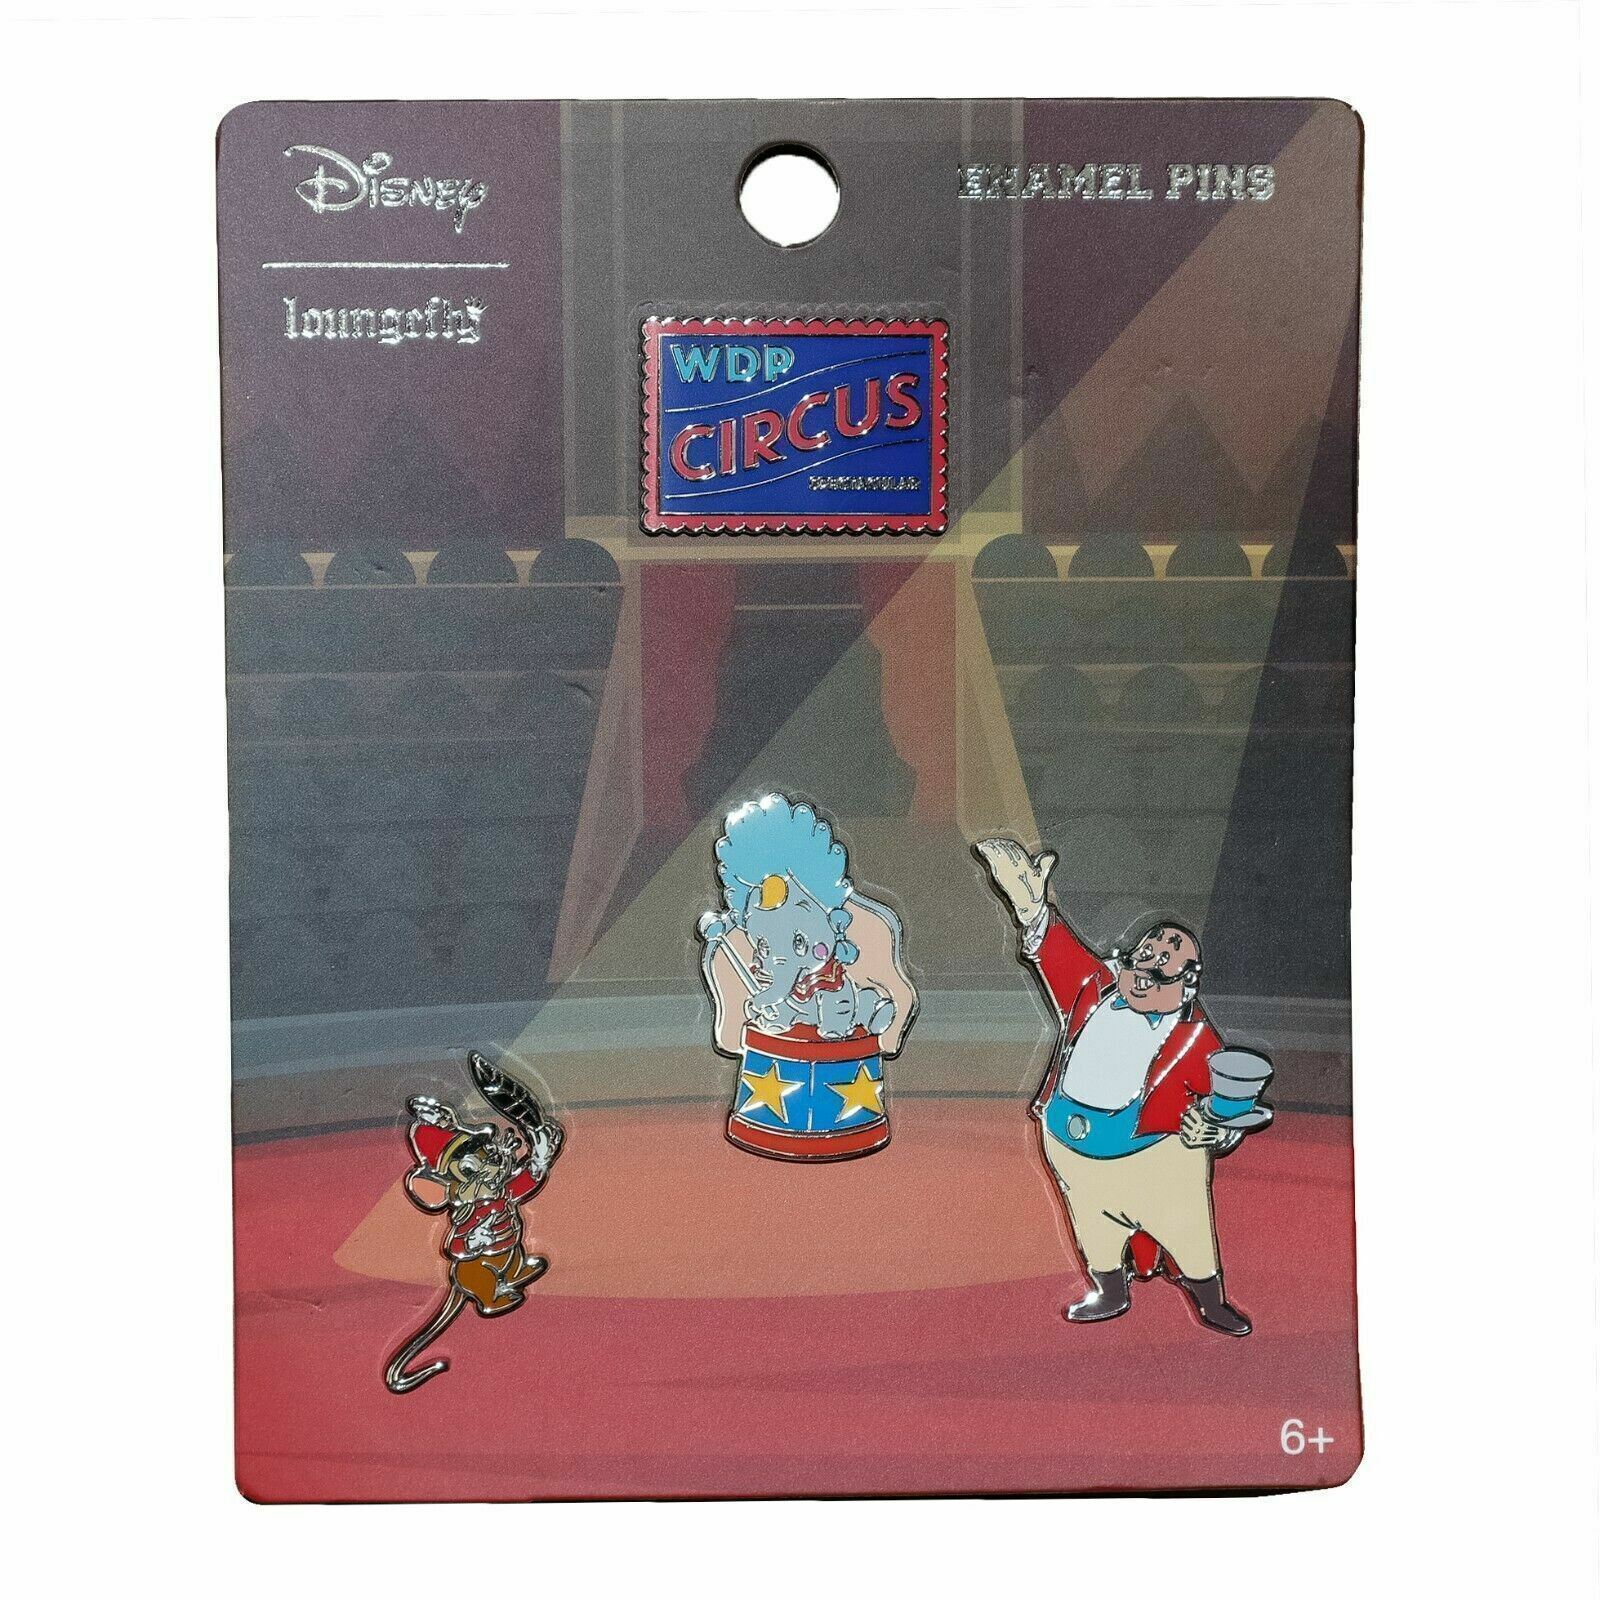 New Collectible Disney's Dumbo's Circus 4 Piece Enamel Pin Set by Loungefly